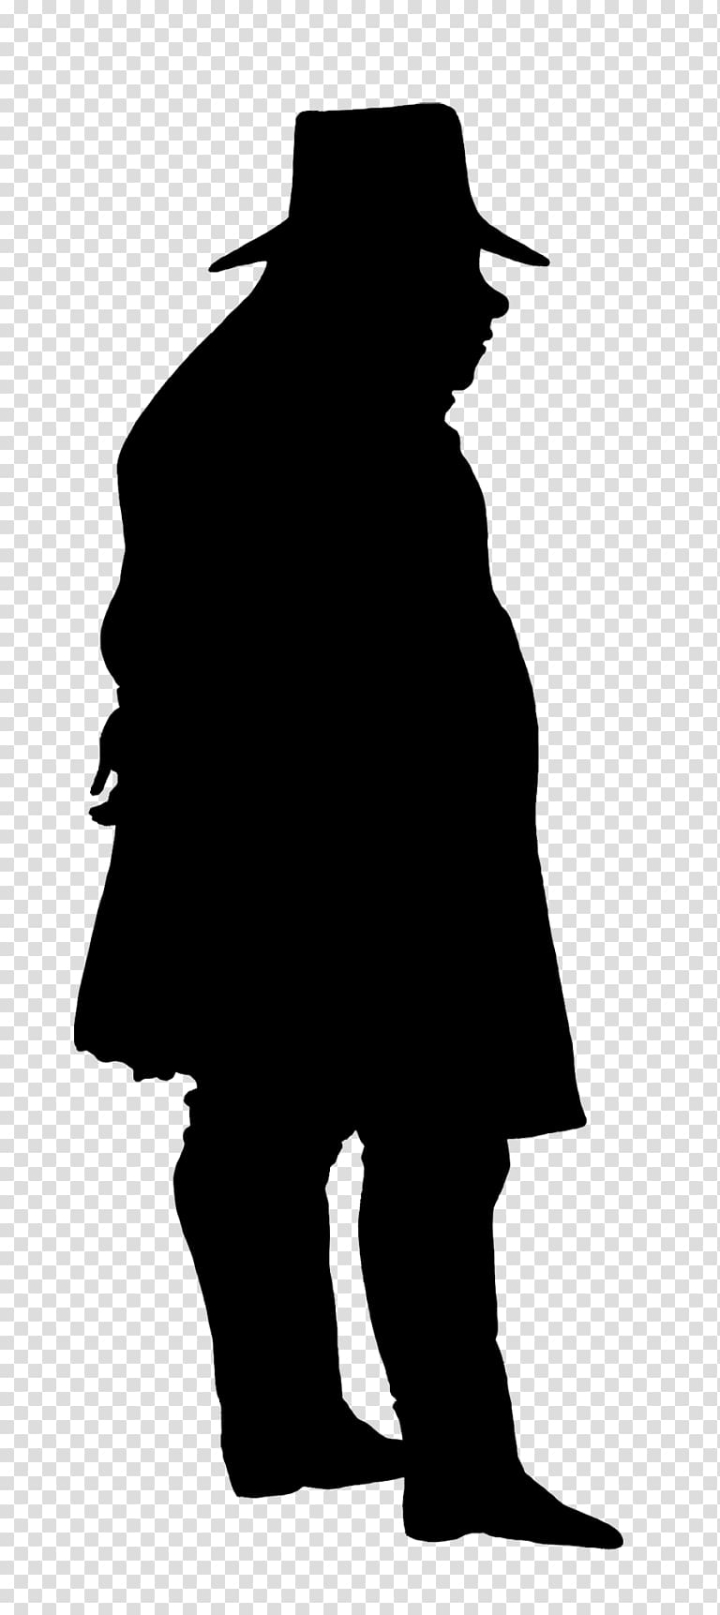 Person, Silhouette, Man, Male, Drawing, Portrait, Profile Of A Person, Face  transparent background PNG clipart